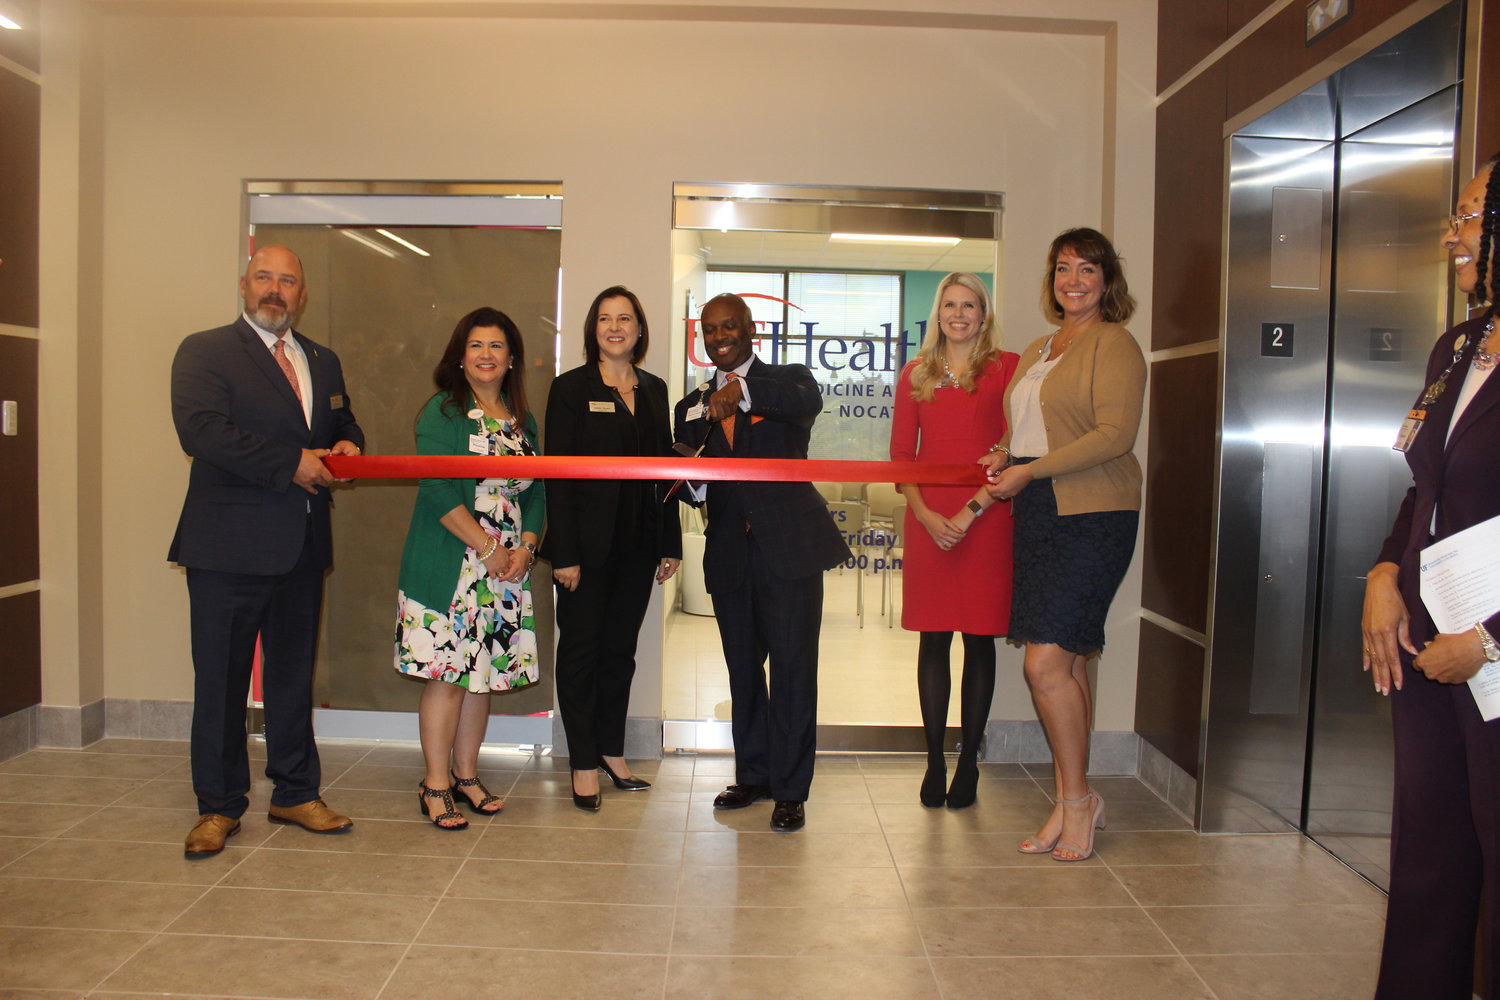 Representatives of UF Health and the St. Johns County Chamber of Commerce gather for a ribbon-cutting ceremony to celebrate the opening of UF Health’s new family medicine and pediatrics office in Nocatee. Pictured is David Godwin, Dr. Victoria Array, Isabelle Renault, Dr. Leon L. Haley Jr., Dr. Katherine McMullan and Toni Boudreaux-Godwin.